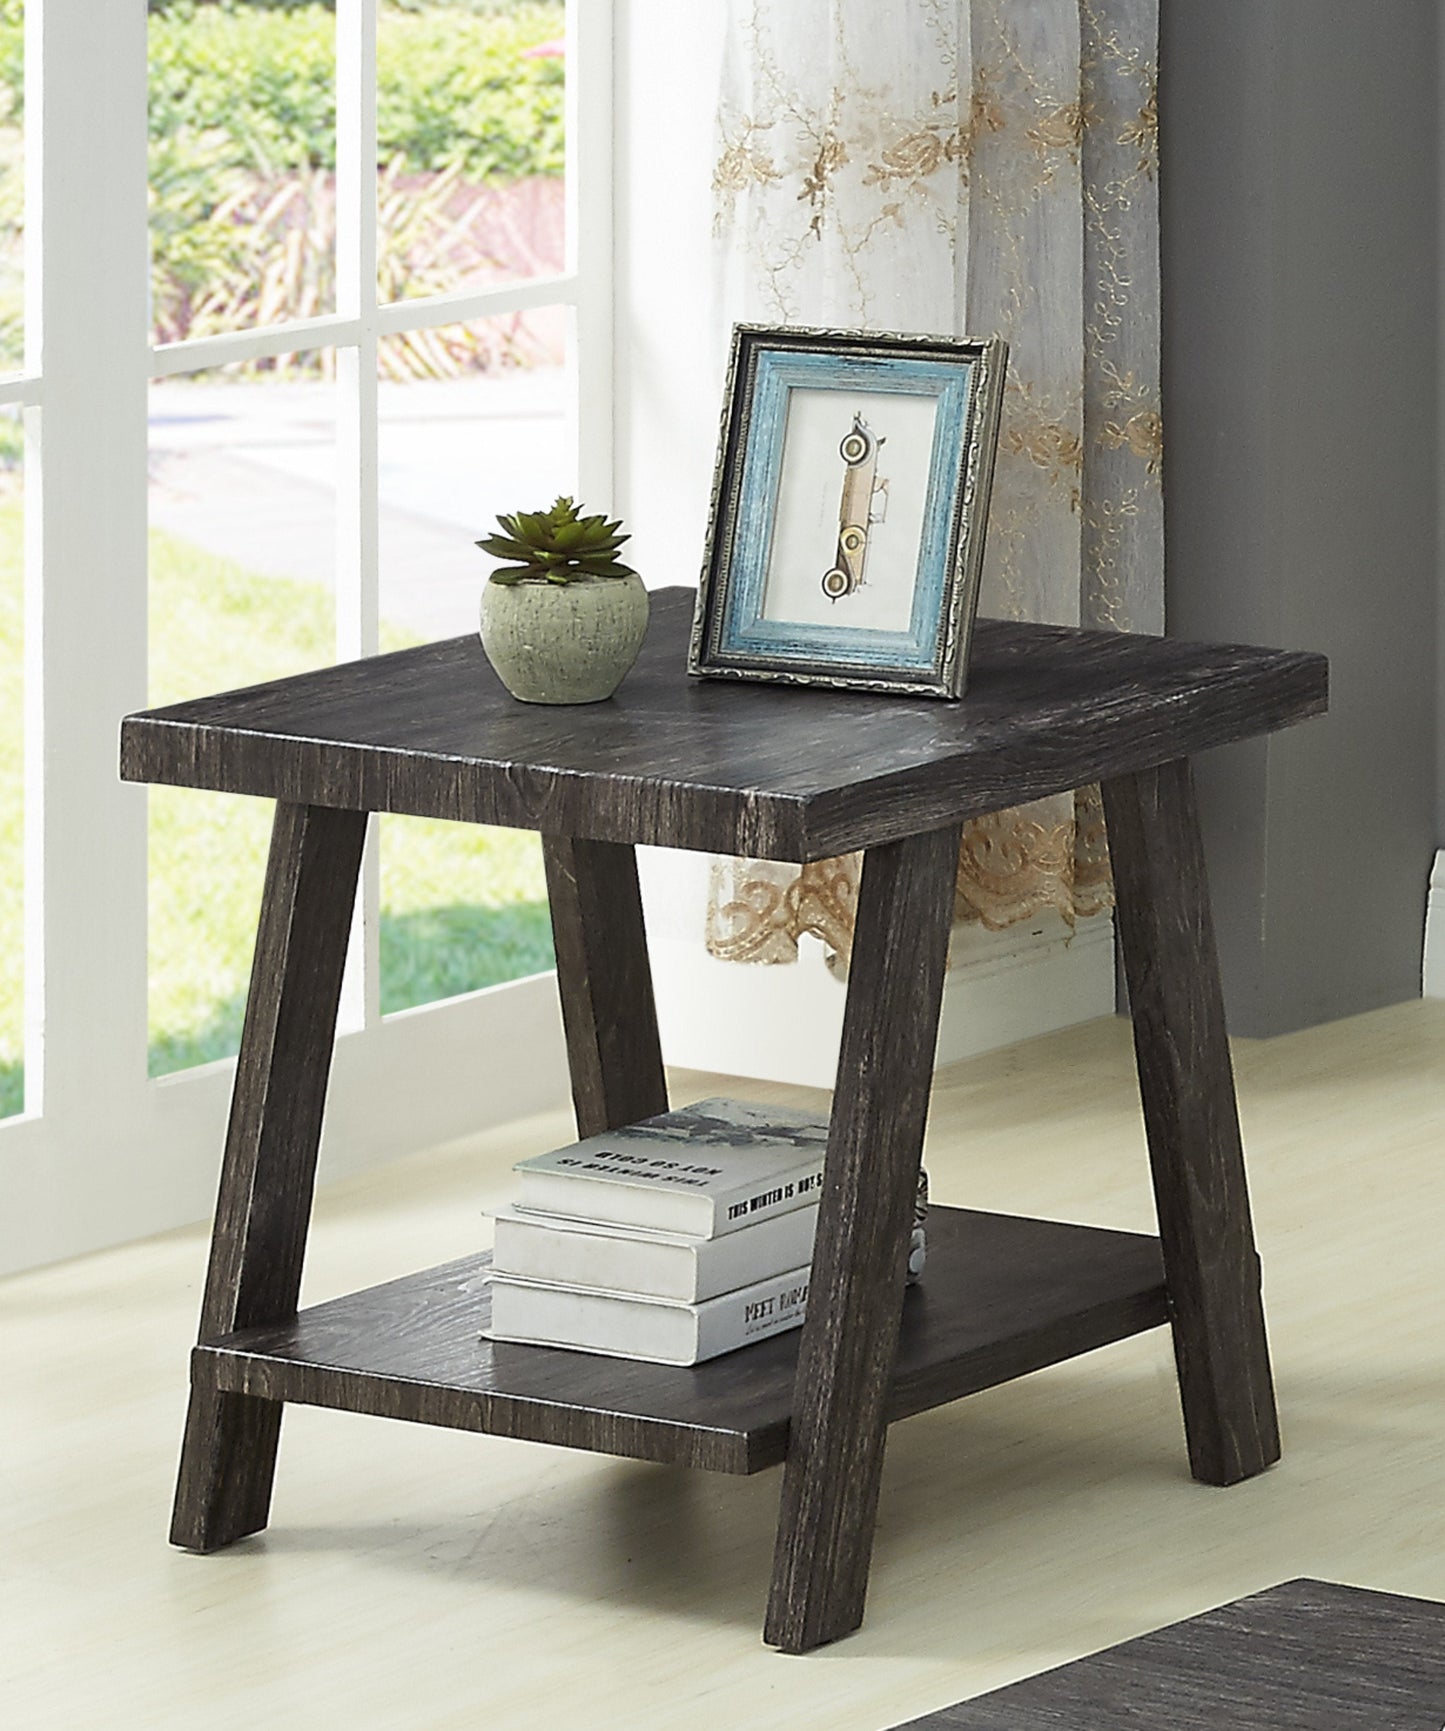 Athens Contemporary Replicated Wood Shelf End Table in Charcoal Finish